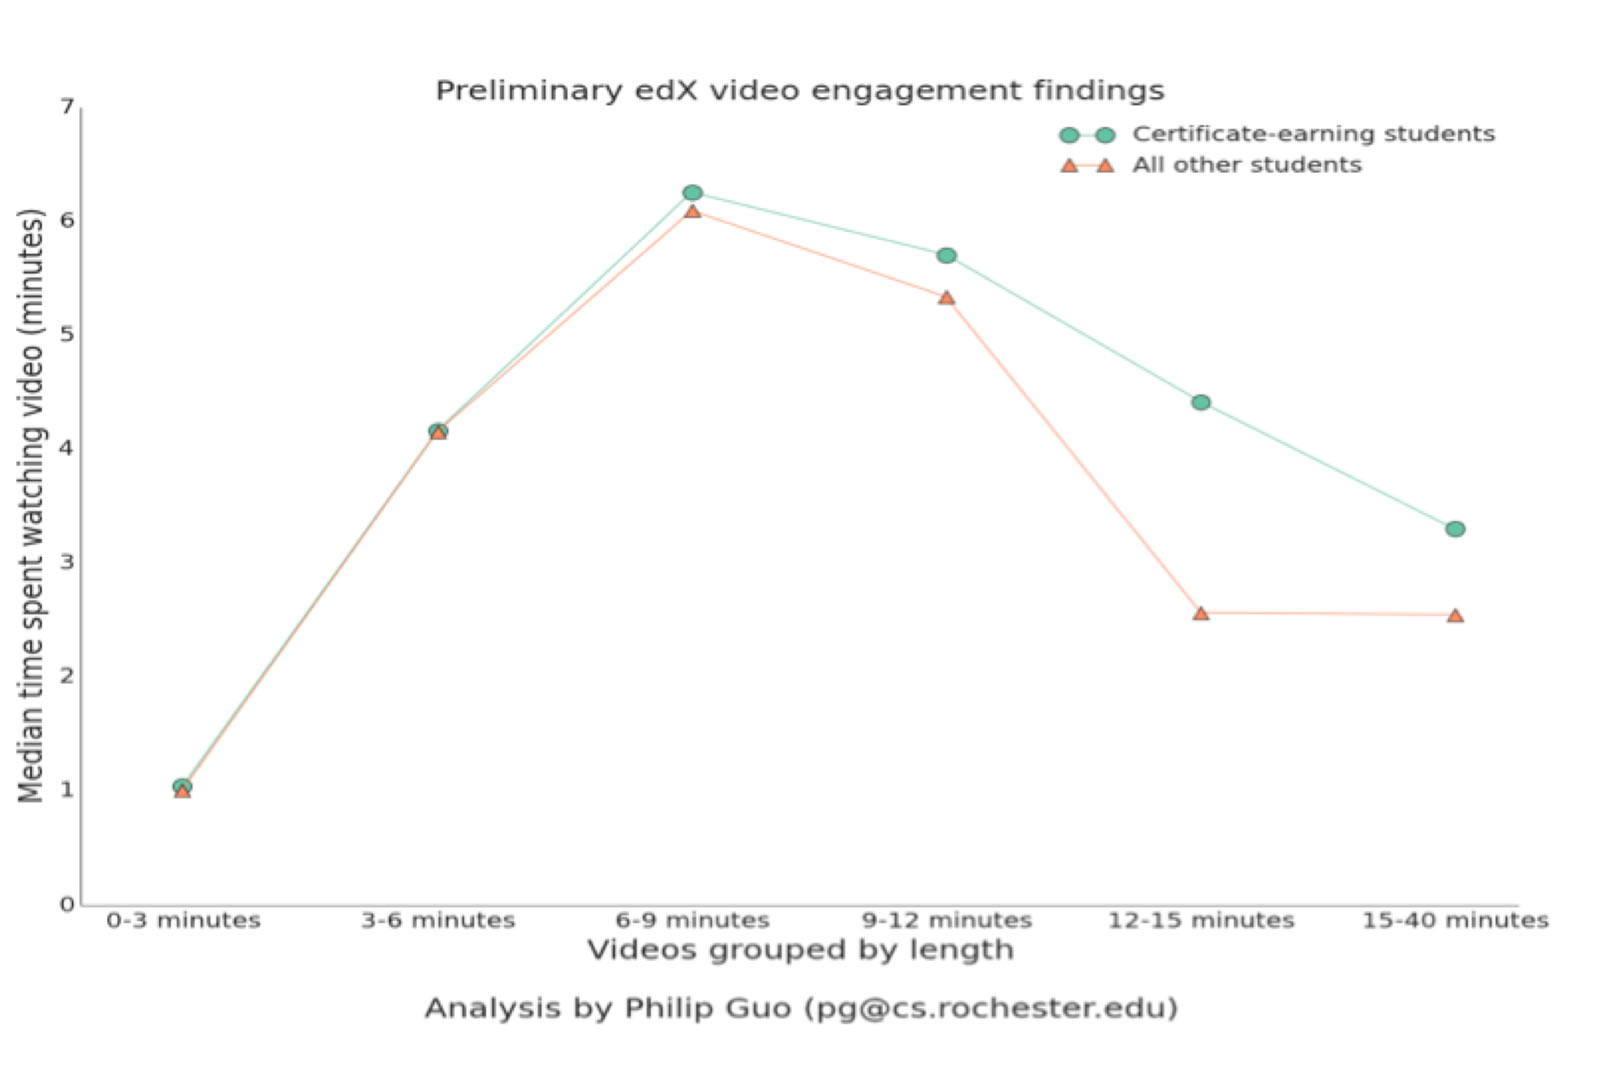 Video engagement results